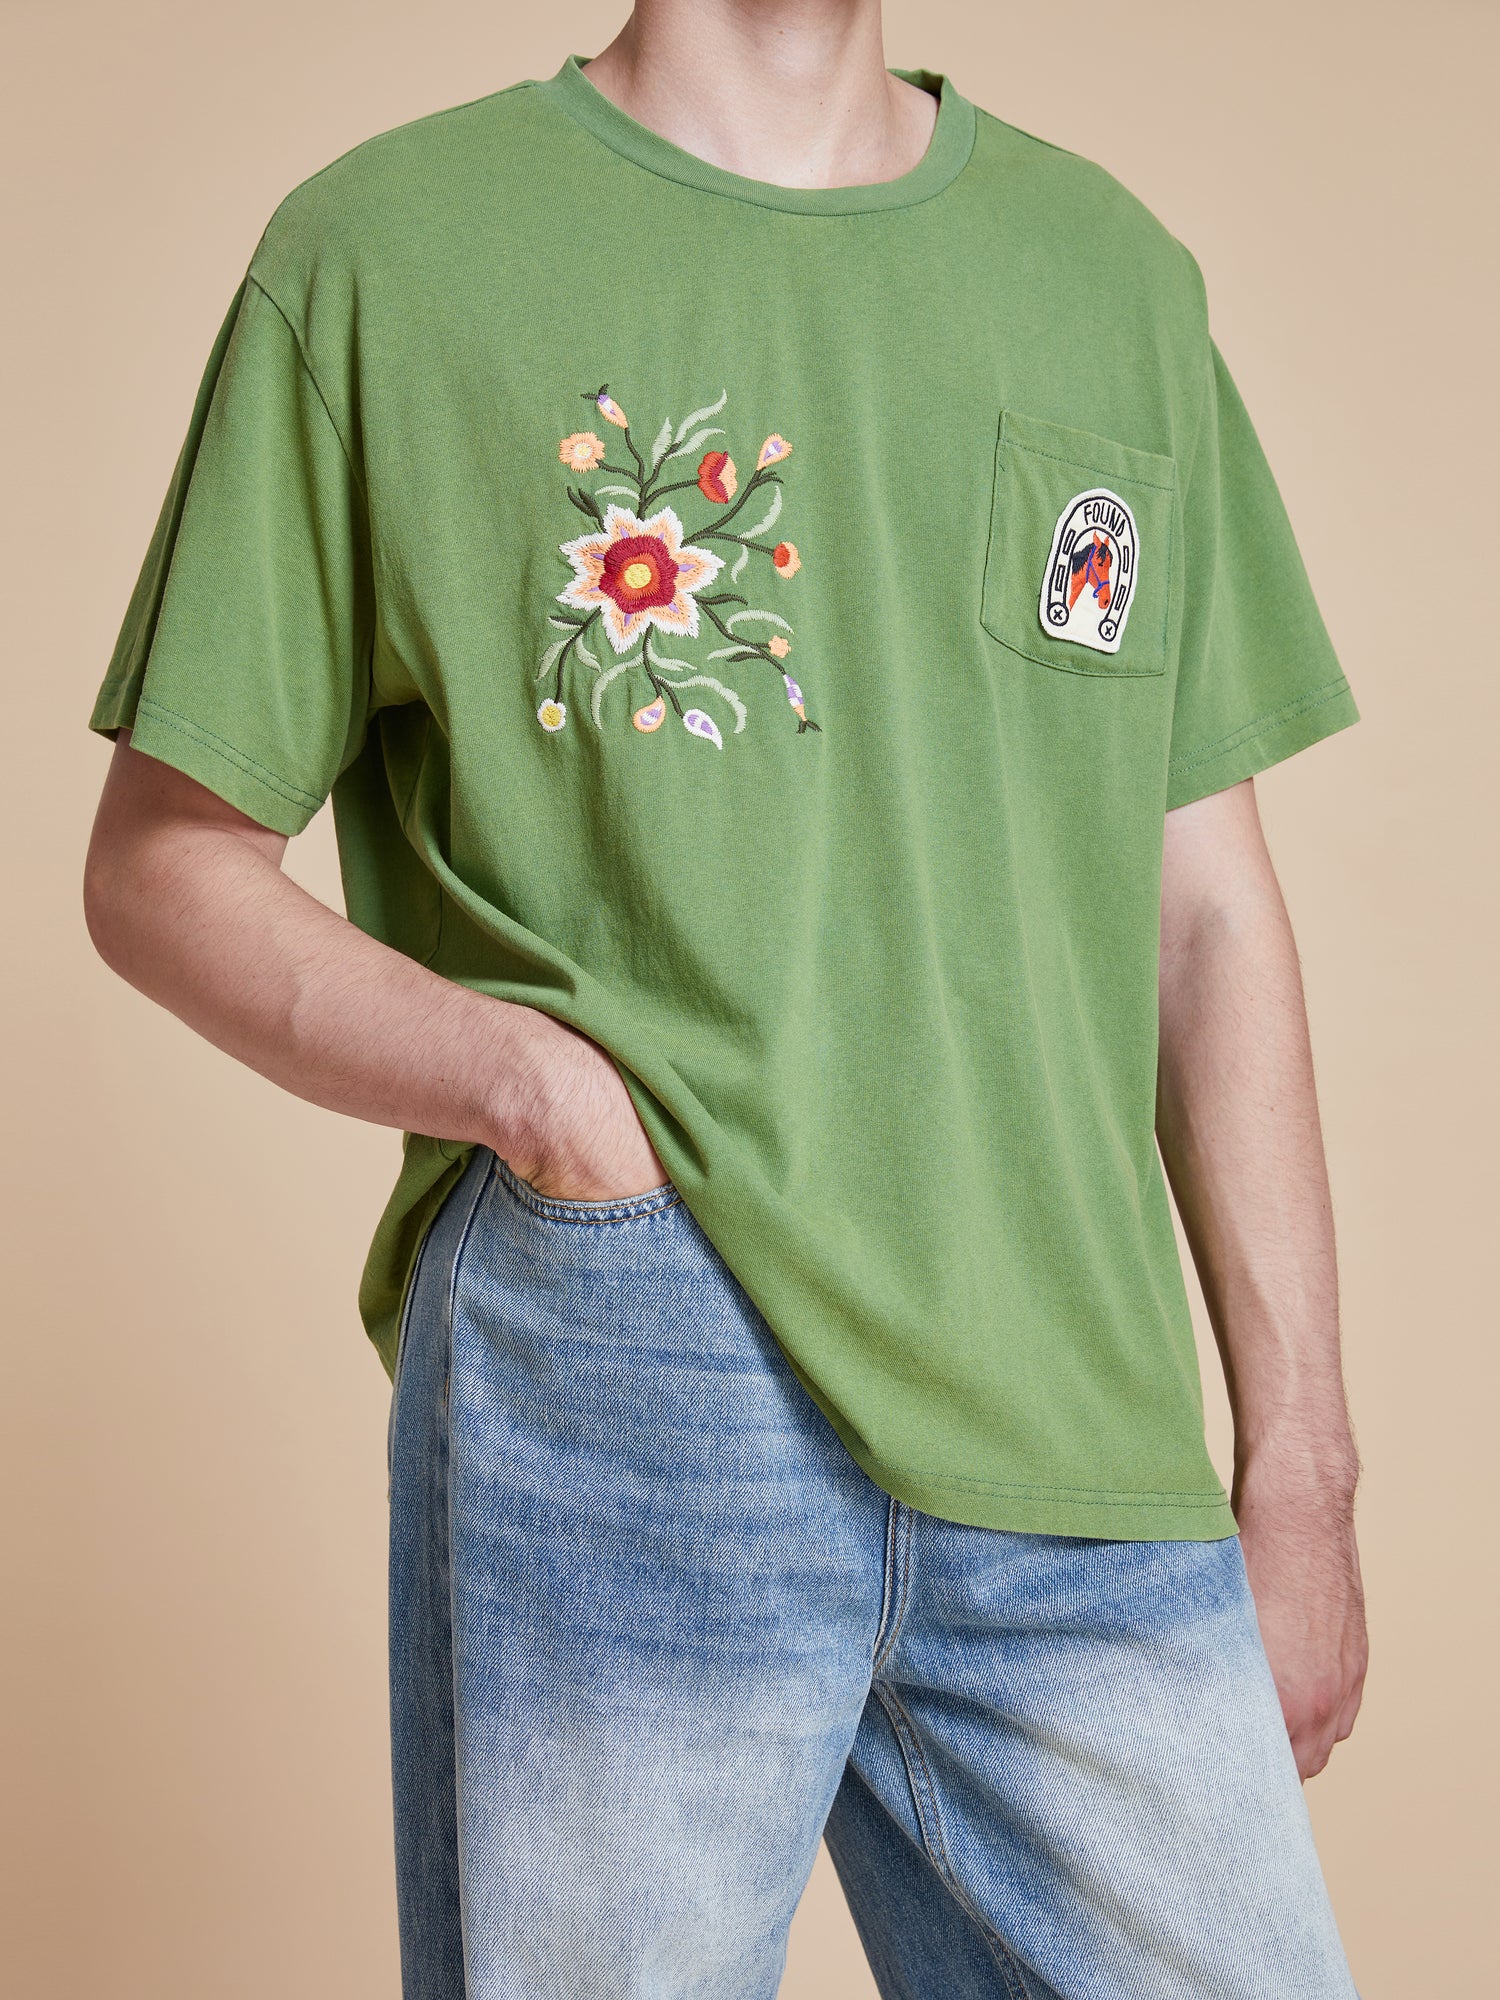 A man wearing a Pine Needle Farm Tee from Found and jeans.